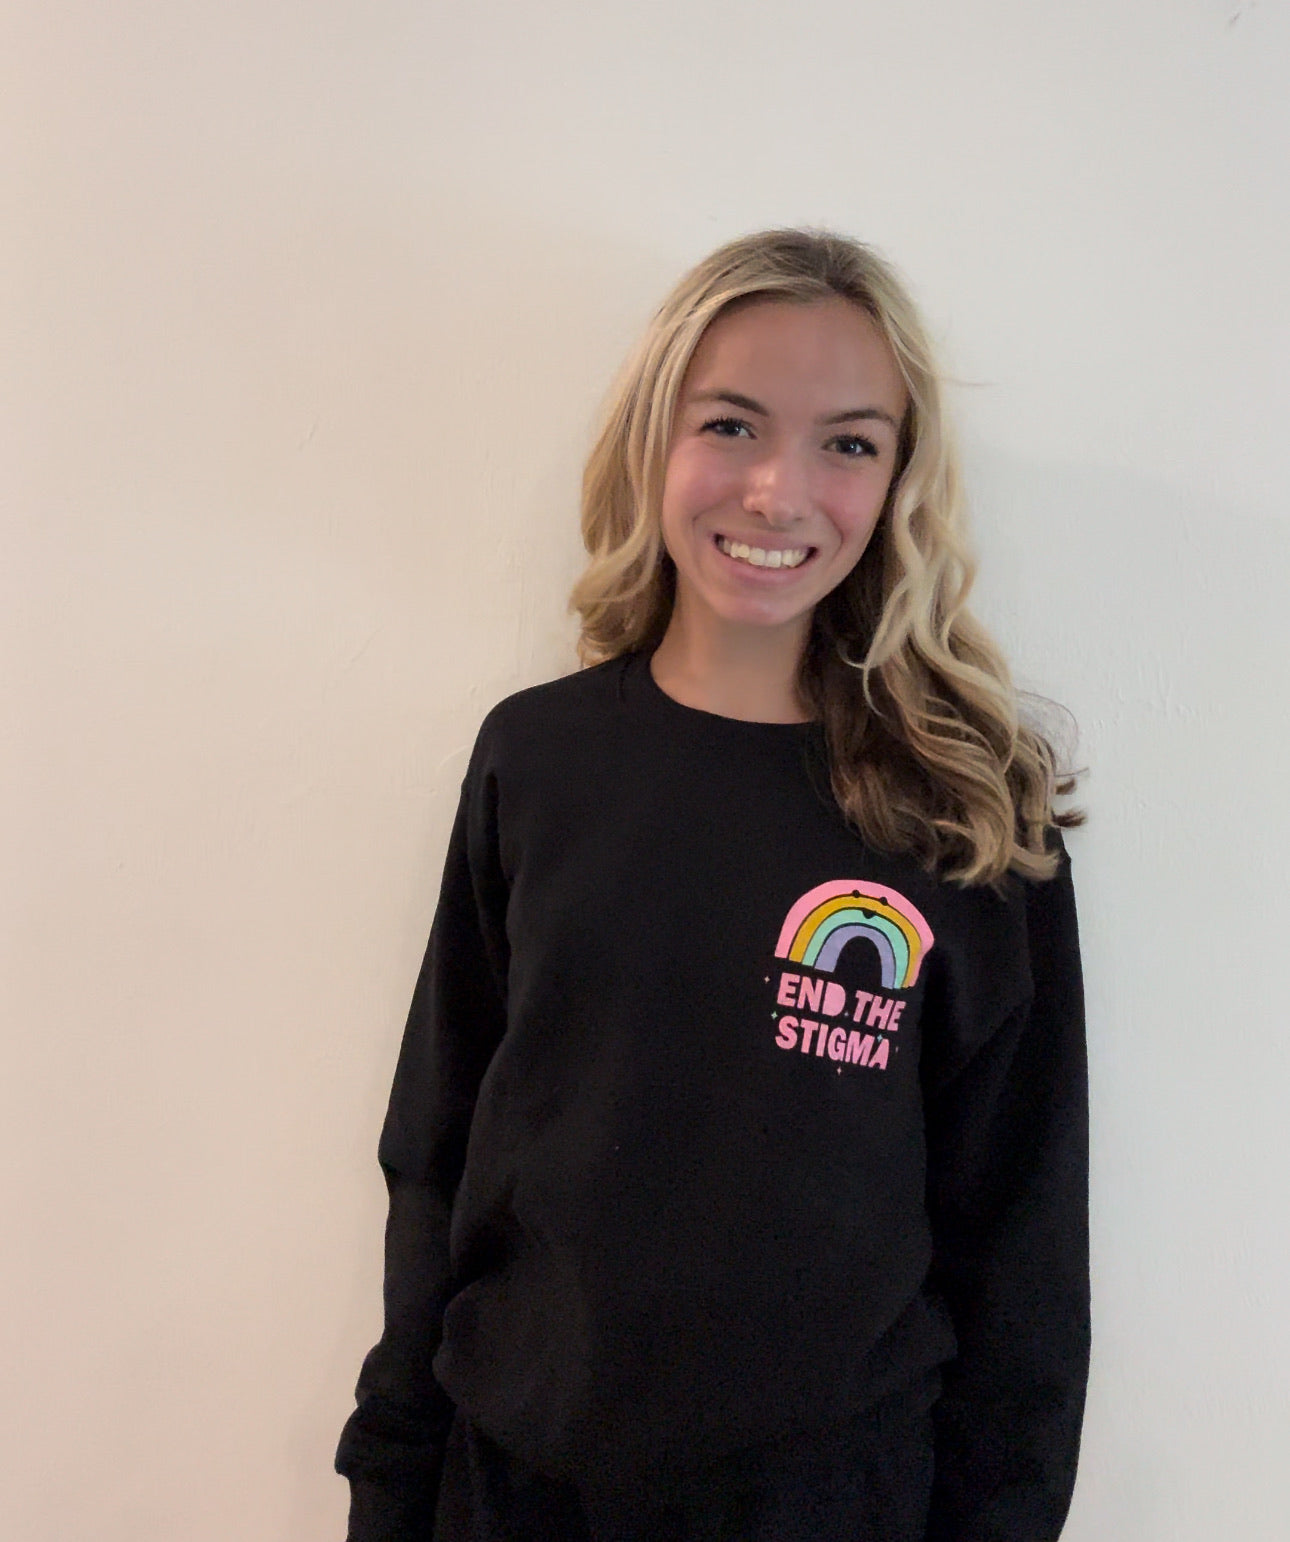 'Mental Health Matters' Multicolor Graphic Sweatshirt: Prep Obsessed x Weather With Lauren (Ships in 2-3 Weeks)